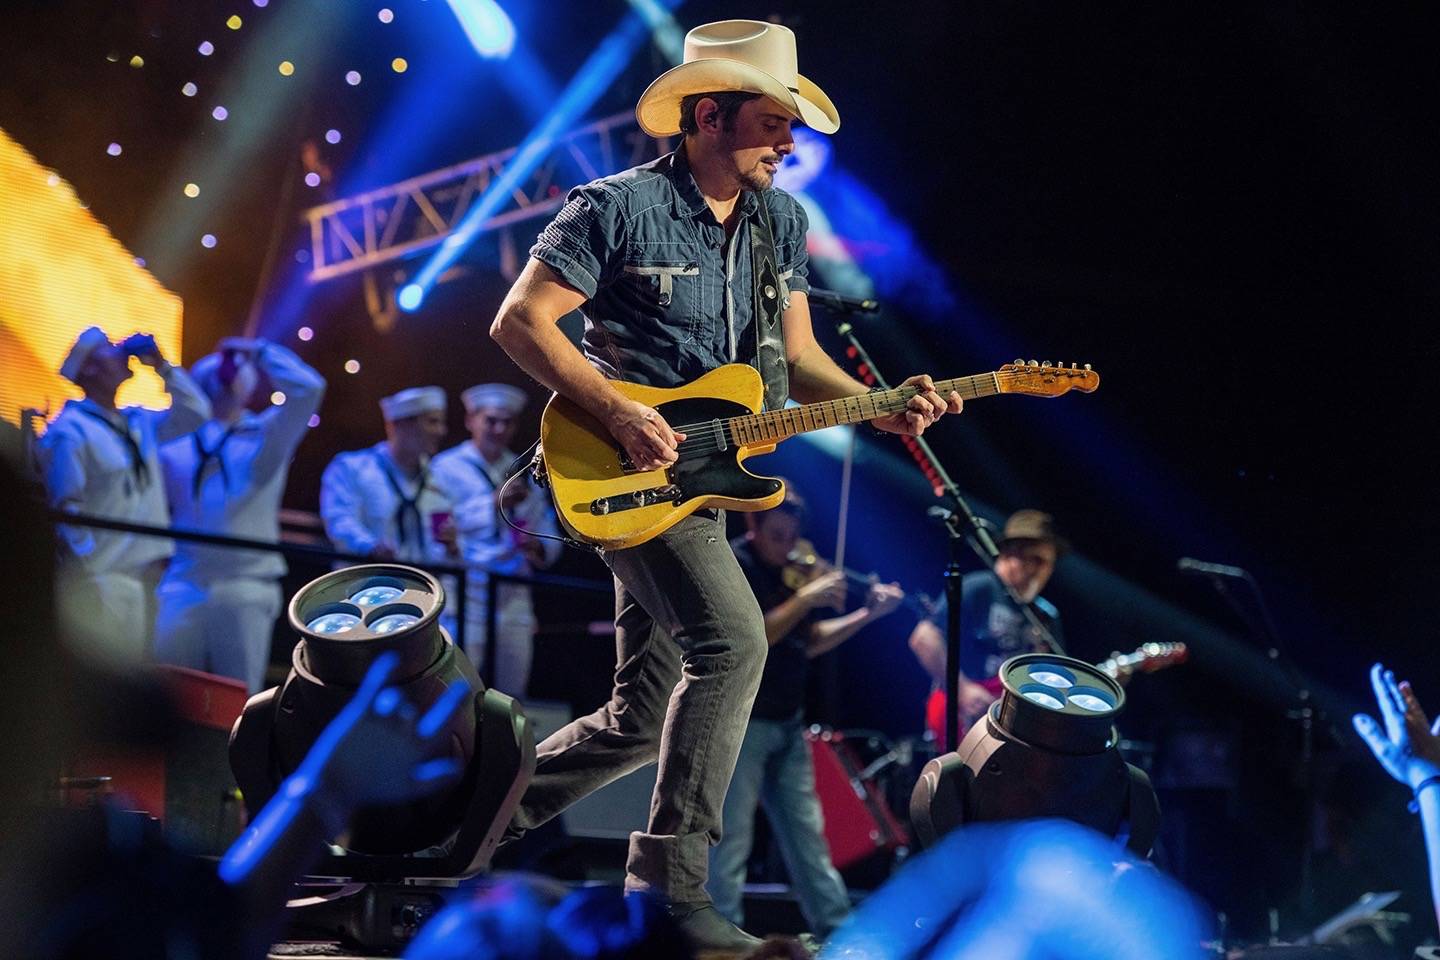 Brad Paisley performs at the state fair on Sunday, Sept. 22. COURTESY PHOTO